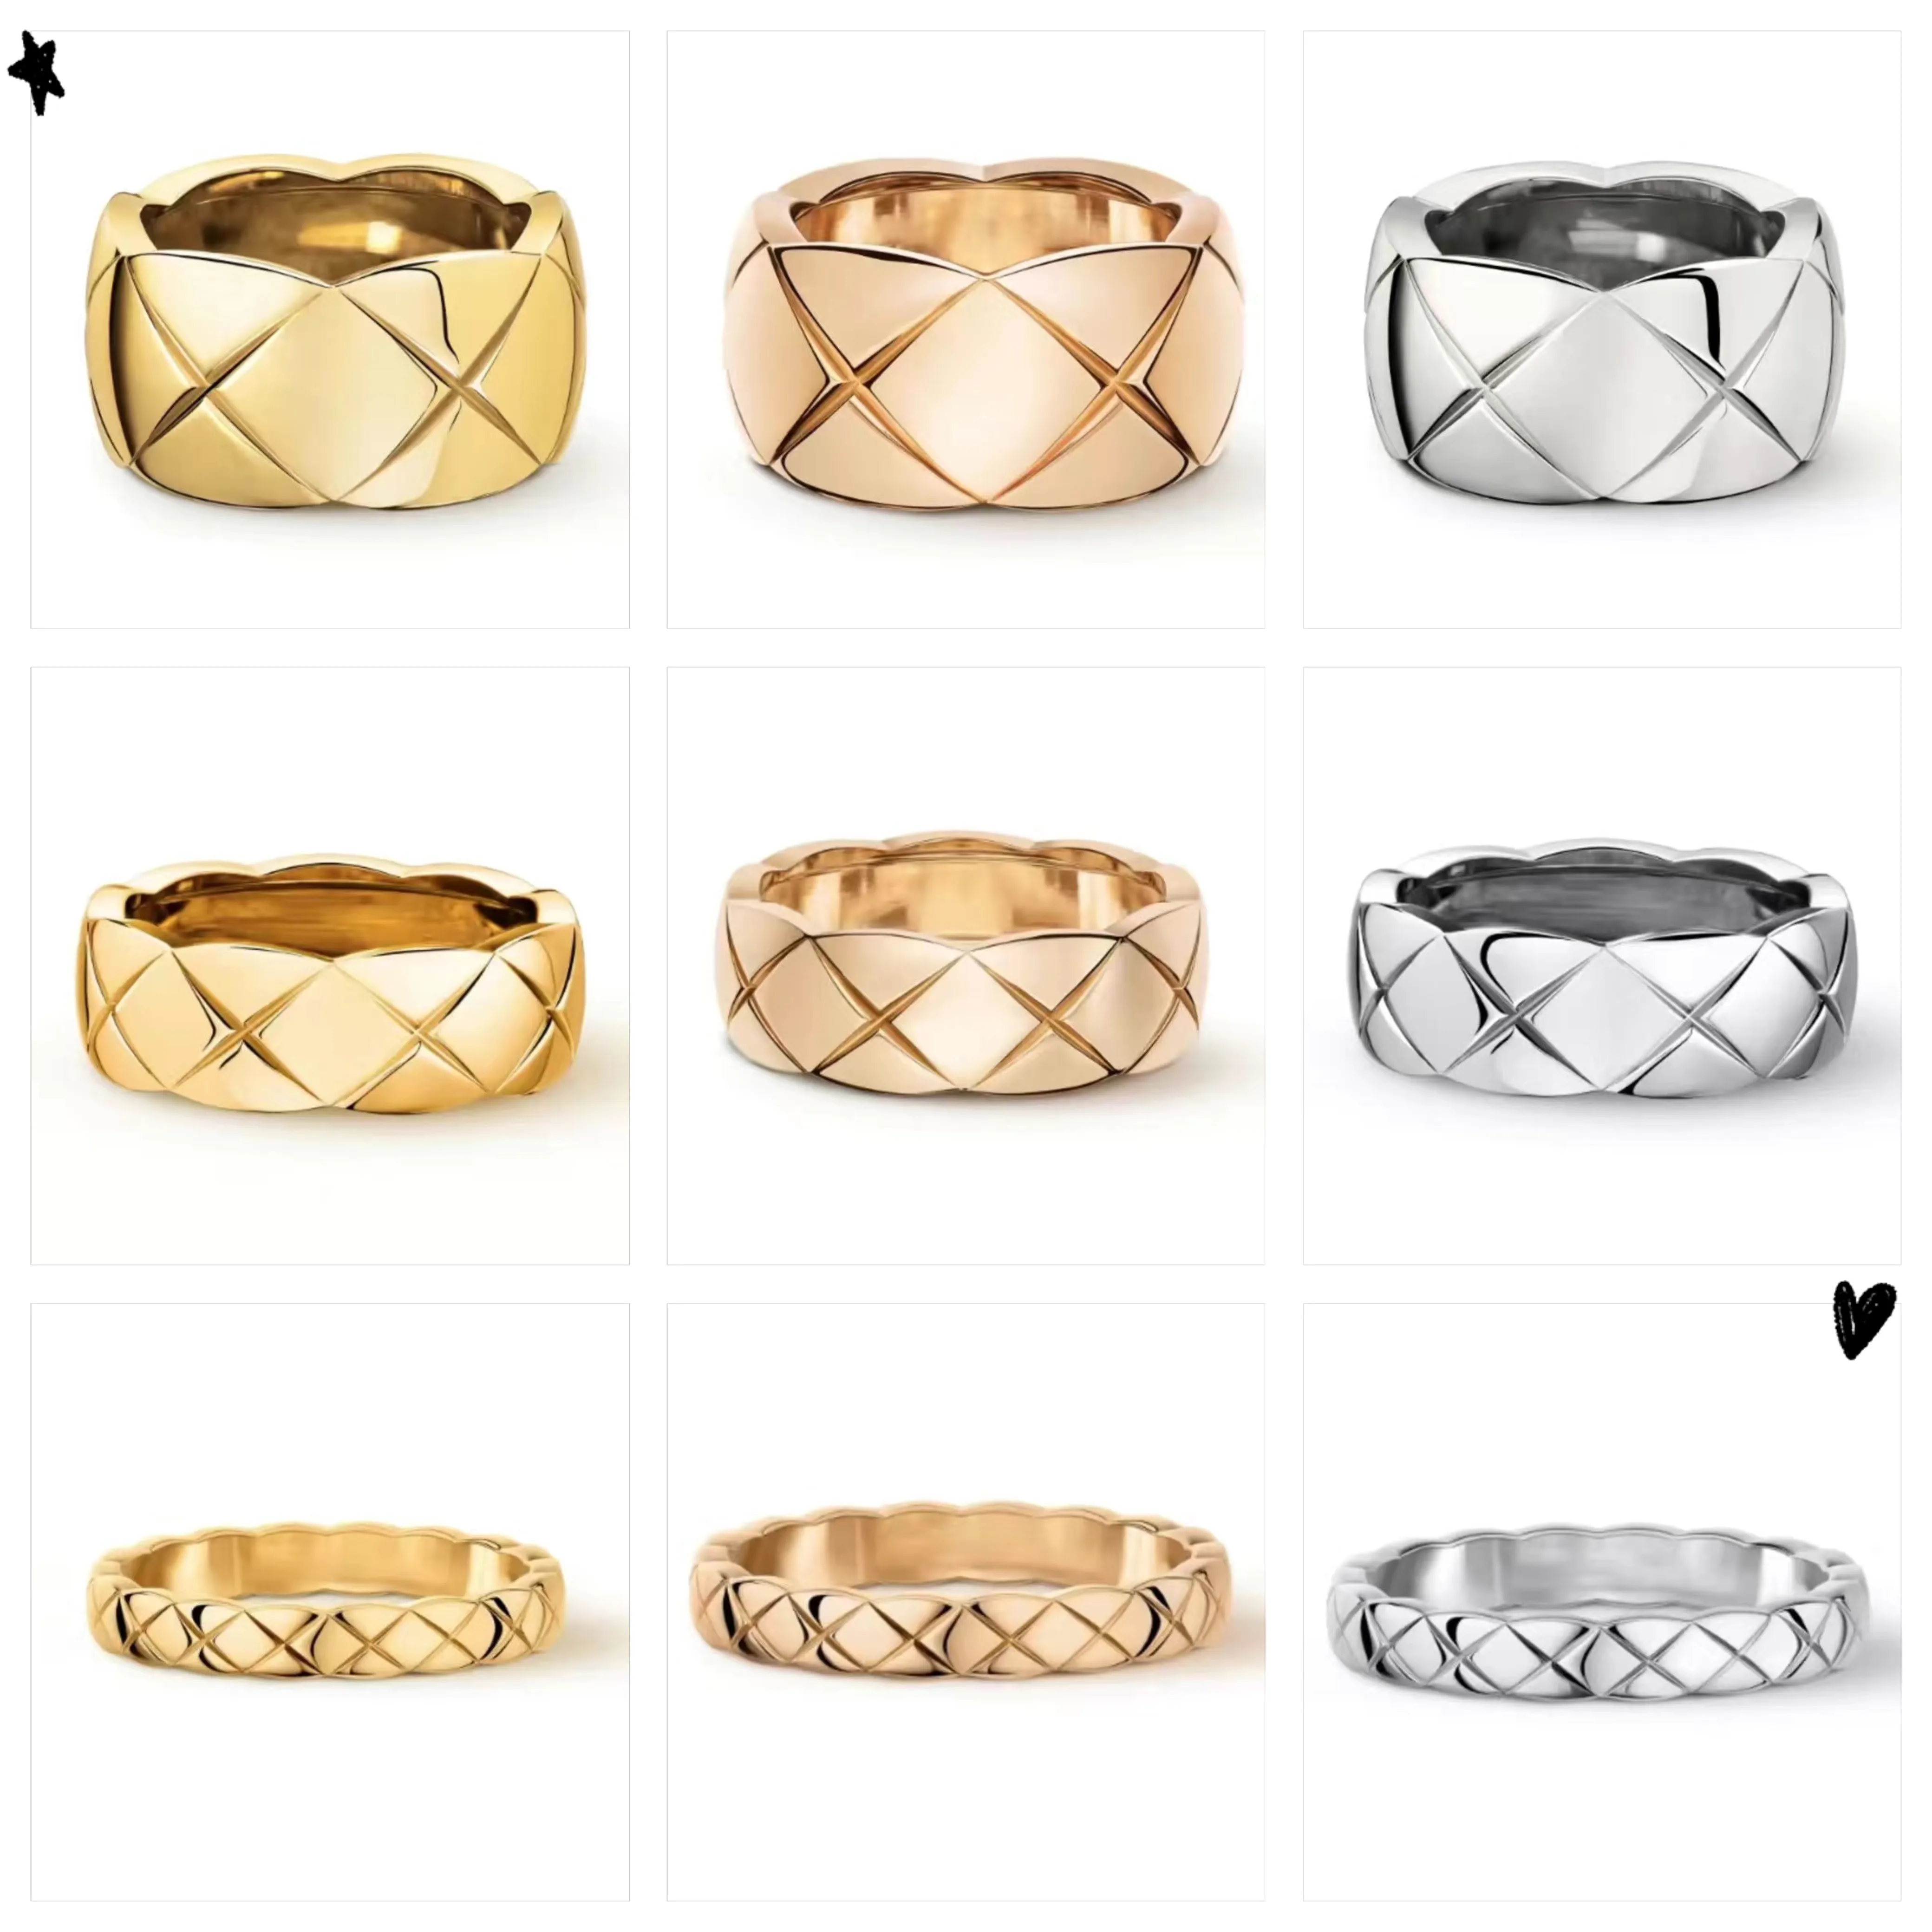 Band Rings 925 Silver Crush With Embossed Diamonds Quilted motif In 5 versions the pattern lends its graphic shapes to this original collection never lose paint